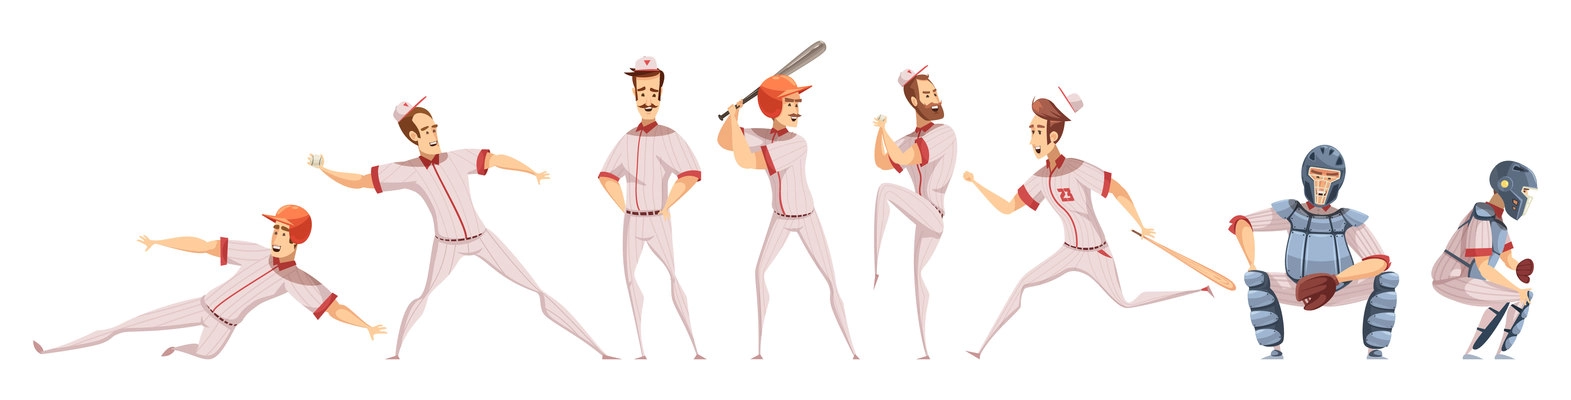 Baseball players colored icons set with cartoon sportsman figurines in different poses on white background flat isolated vector illustration